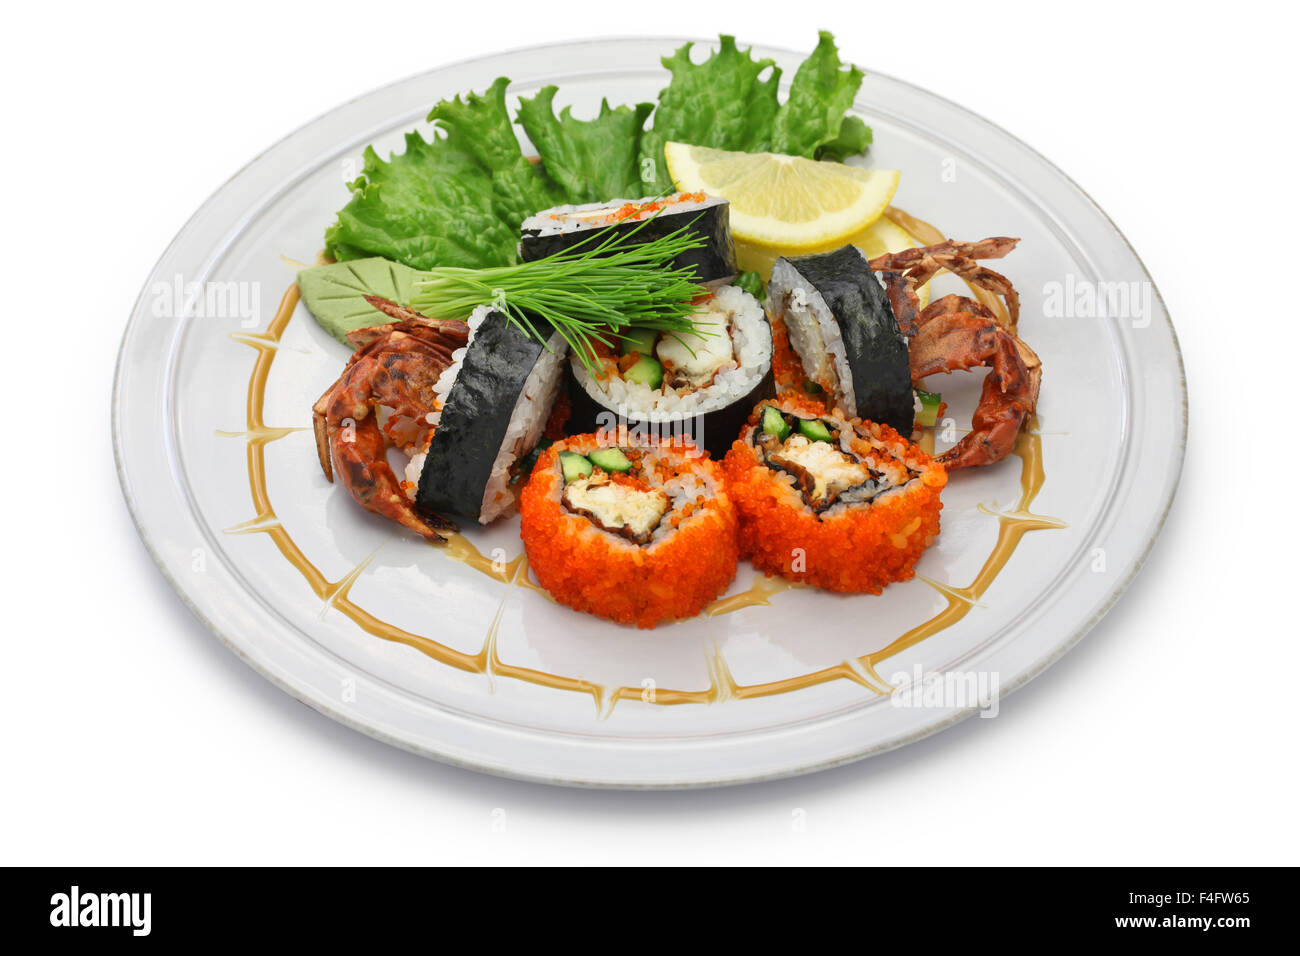 spider roll, maki sushi made of soft shell crab tempura and sushi rice, halloween party dinner Stock Photo